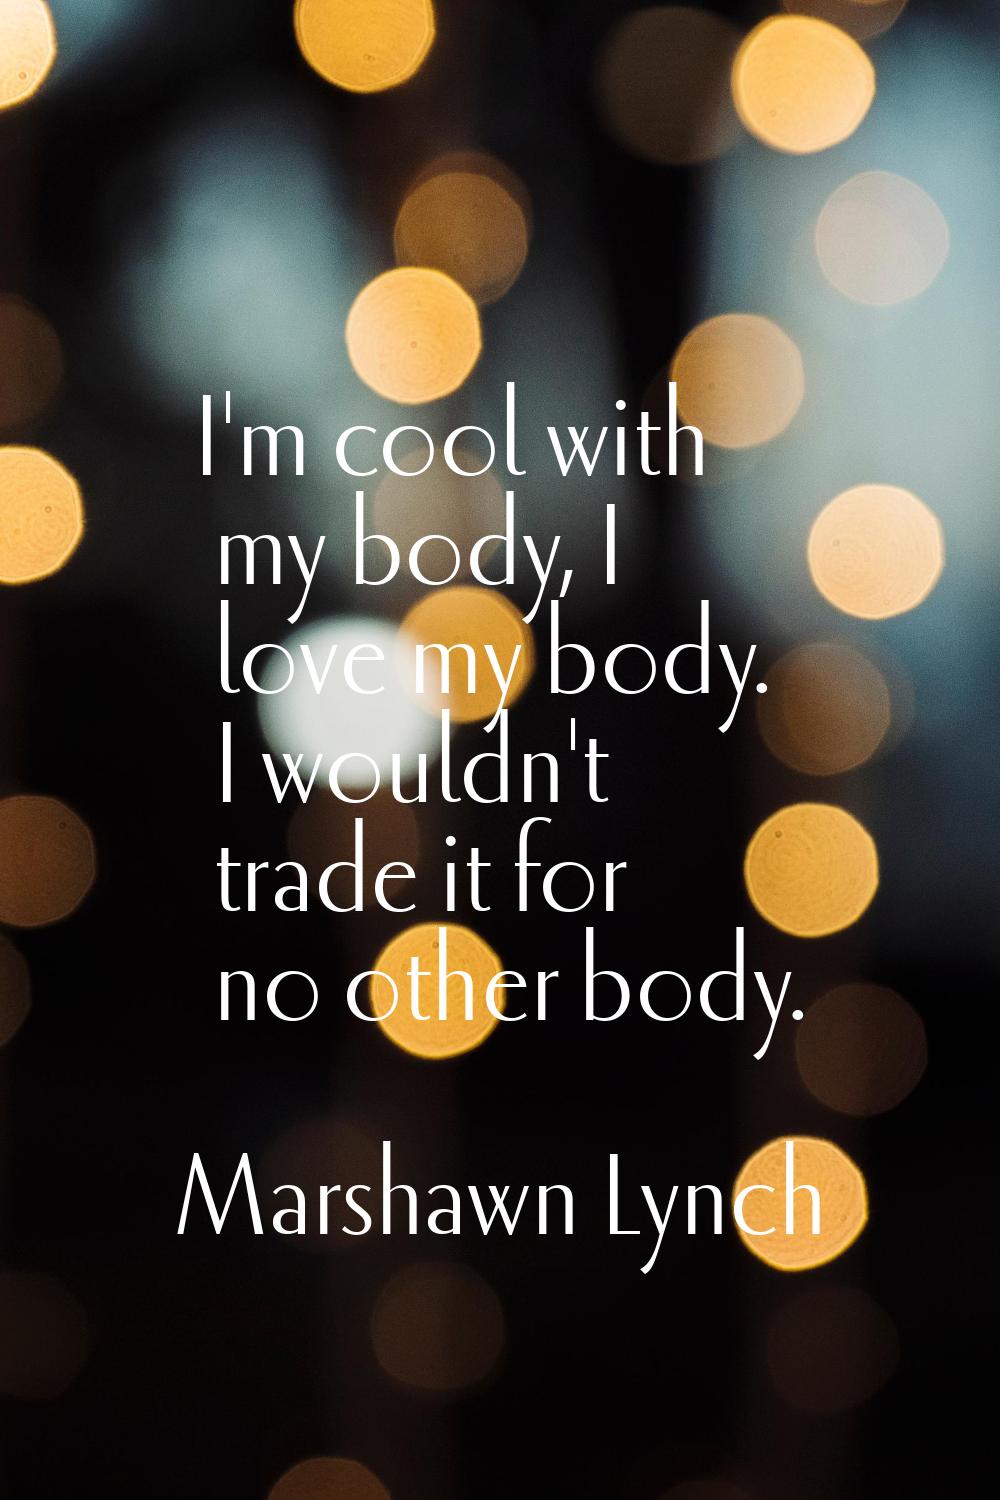 I'm cool with my body, I love my body. I wouldn't trade it for no other body.